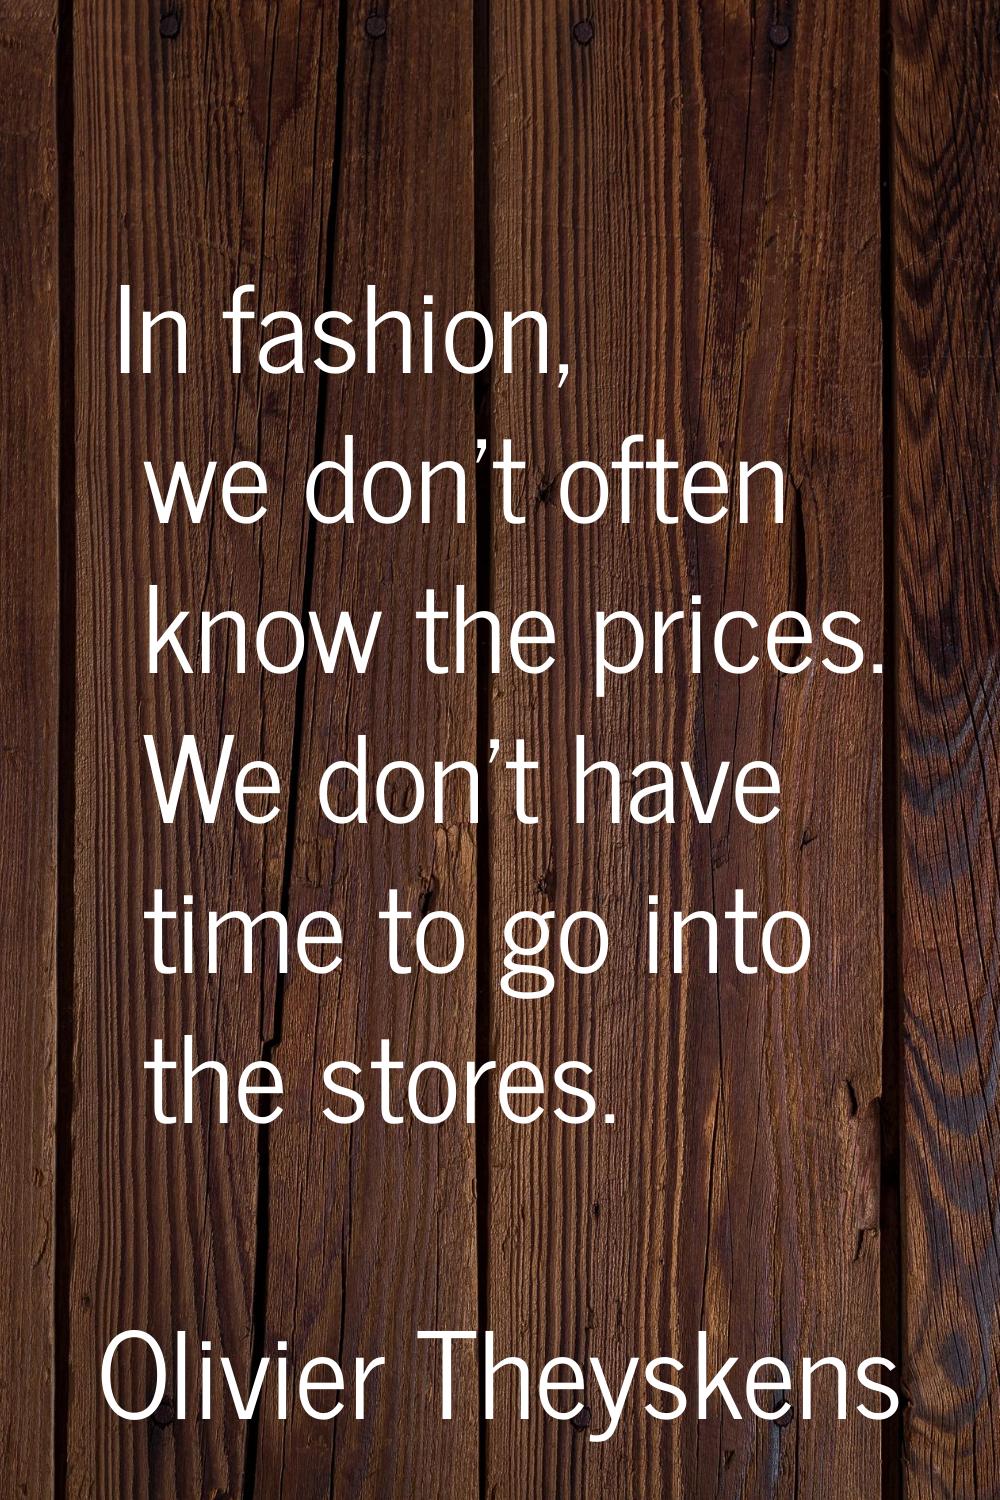 In fashion, we don't often know the prices. We don't have time to go into the stores.